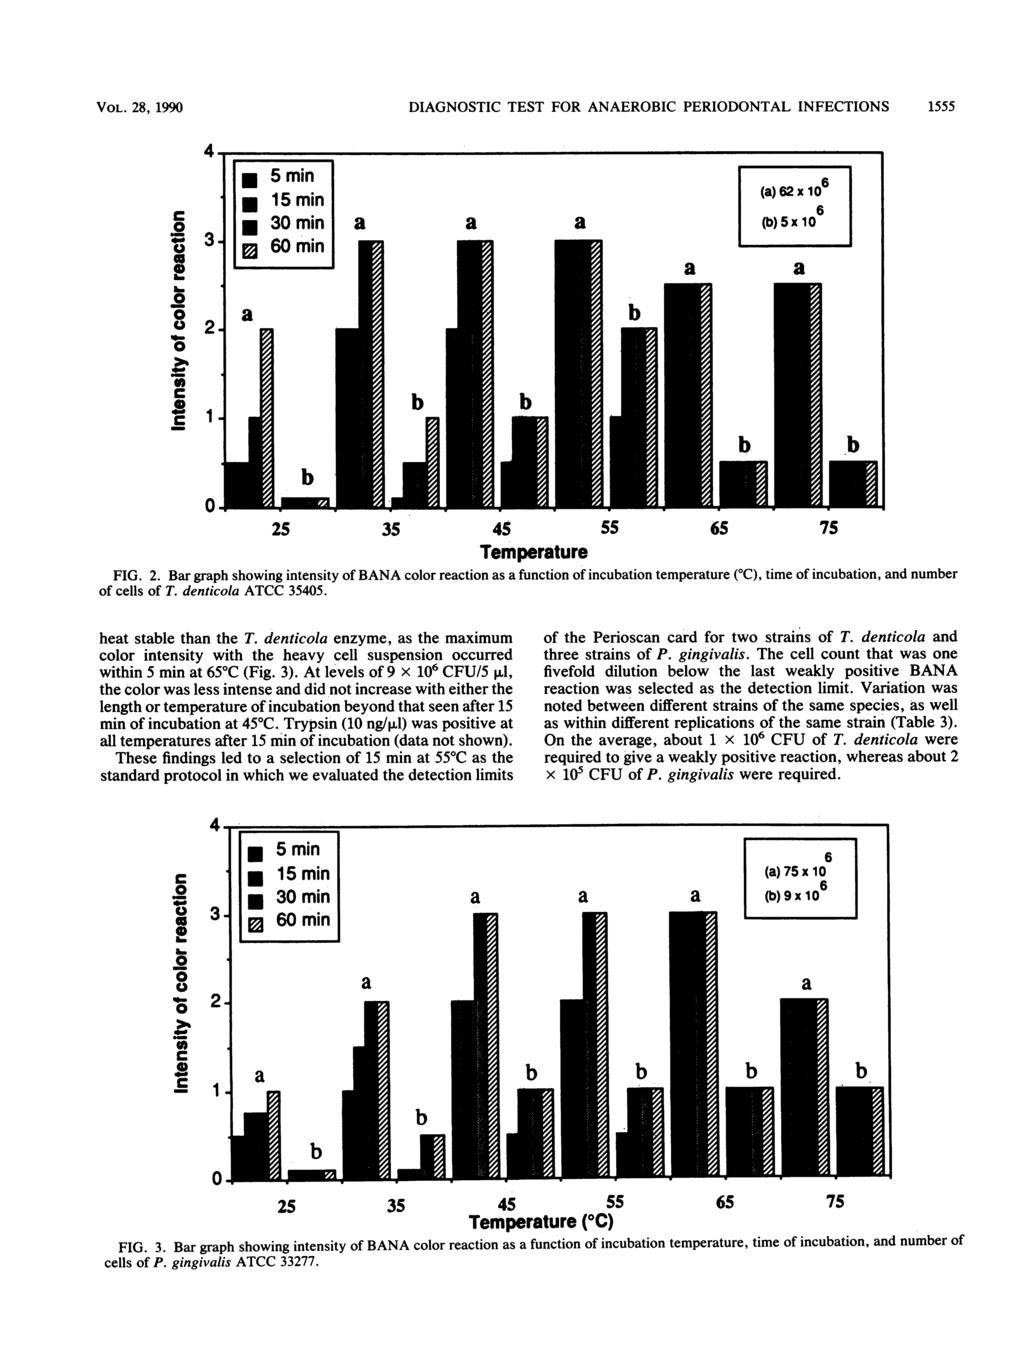 VOL. 28, 1990 DIAGNOSTIC TEST FOR ANAEROBIC PERIODONTAL INFECTIONS 1555 E 0.2 e 0o m. 0 1-0o 2 3 2 1 02 25 35 45 Temperture 55 65 75 FIG. 2. Br grph showing intensity of BANA color rection s function of incution temperture ( C), time of incution, nd numer of cells of T.